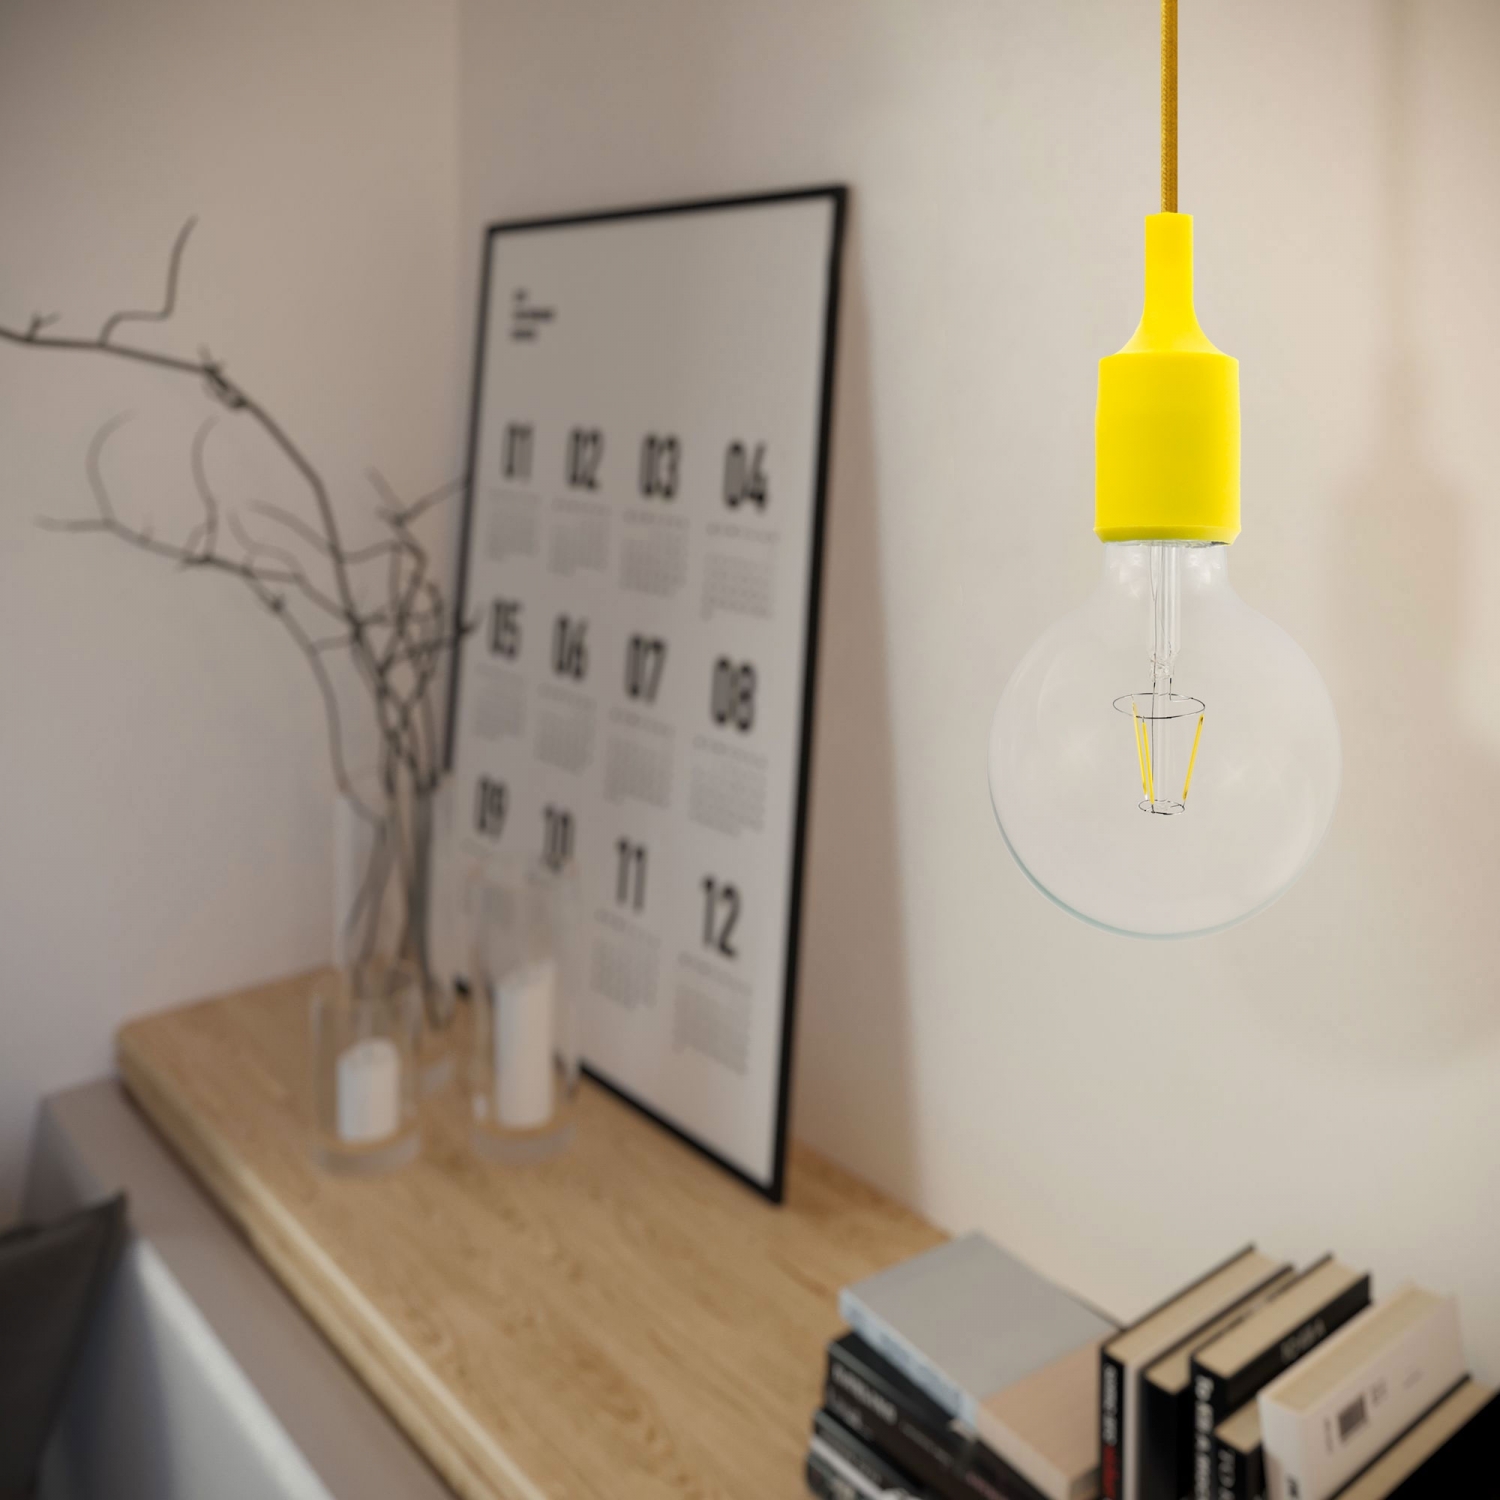 Single Pendant Light with cloth covered wire - Silicone